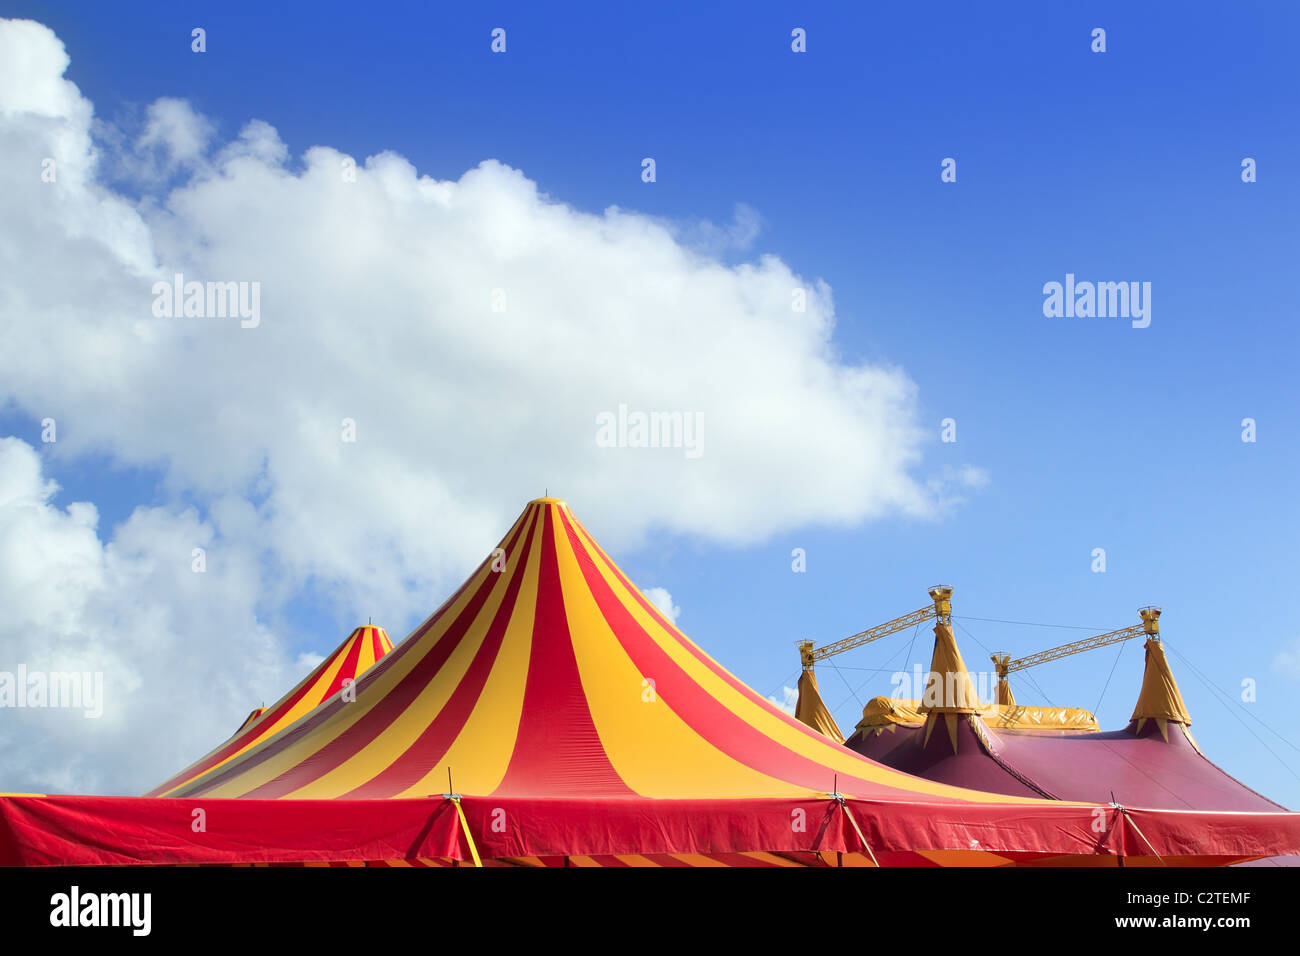 Circus tent red orange and yellow stripped pattern blue sky Stock Photo